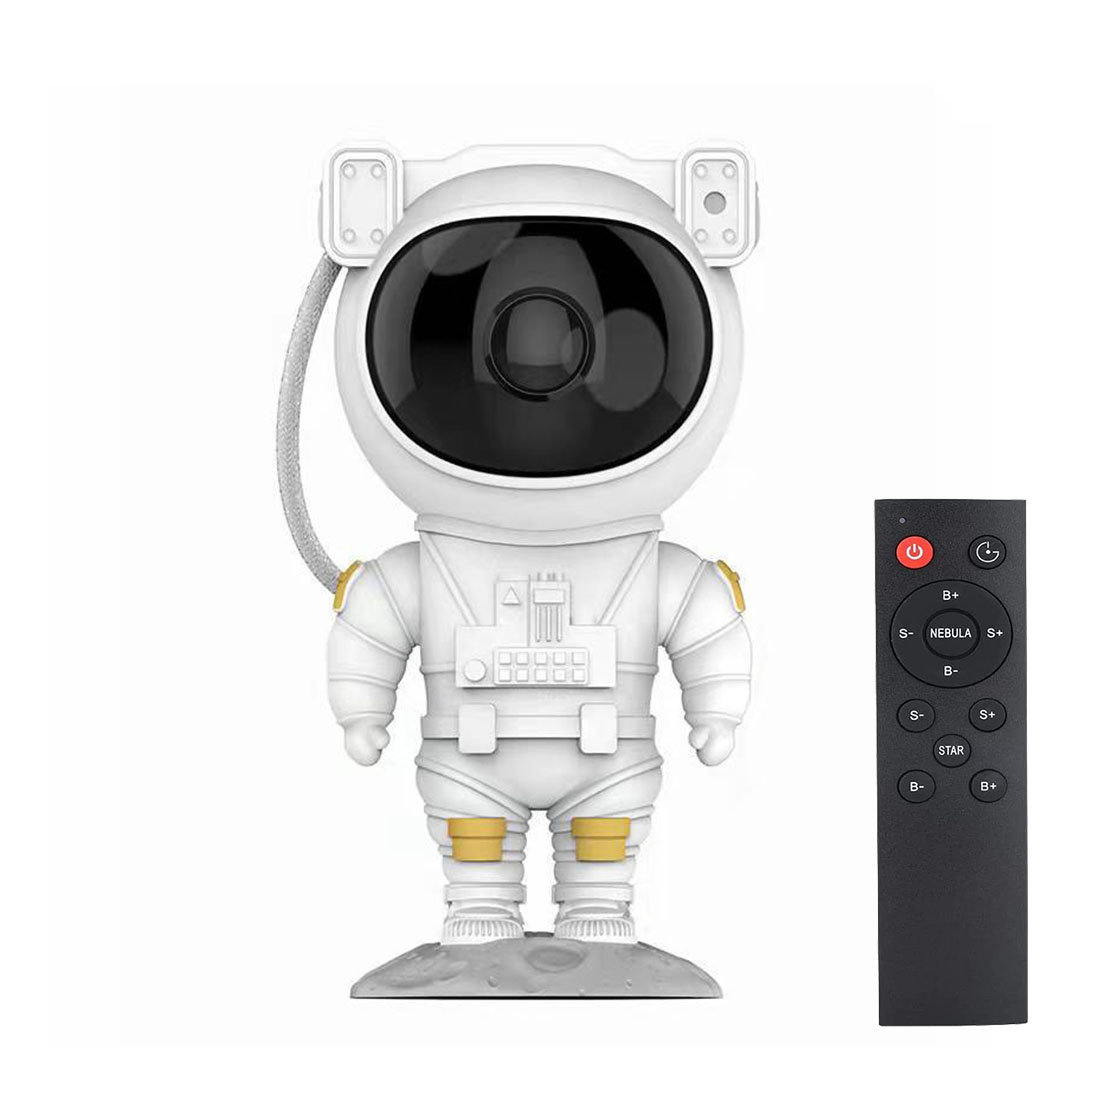  Space Buddy Projector, Astronaut Light Projector, Star Galaxy  Night Lights, Nebula Galaxy with Timer and Remote, Kids Gaming Room Bedroom  Decor, Christmas, Great Gift for Kids : Baby